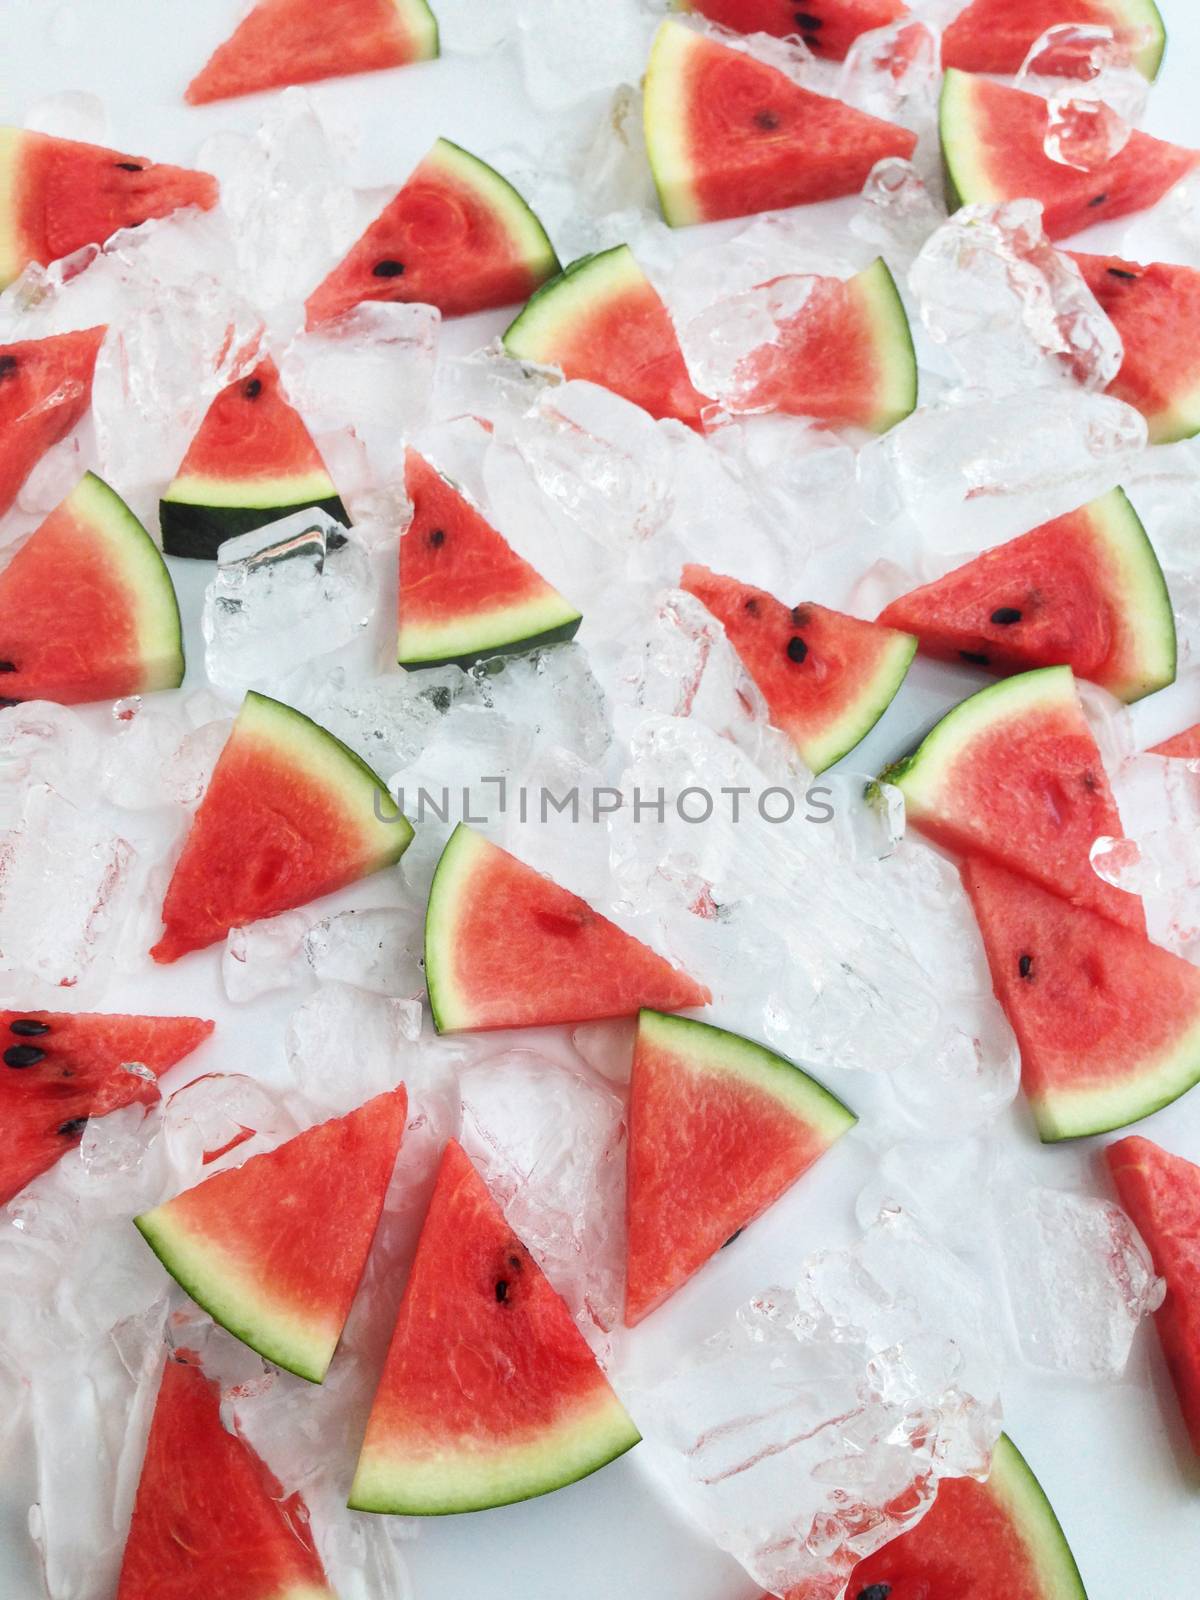 slices of watermelon on ice